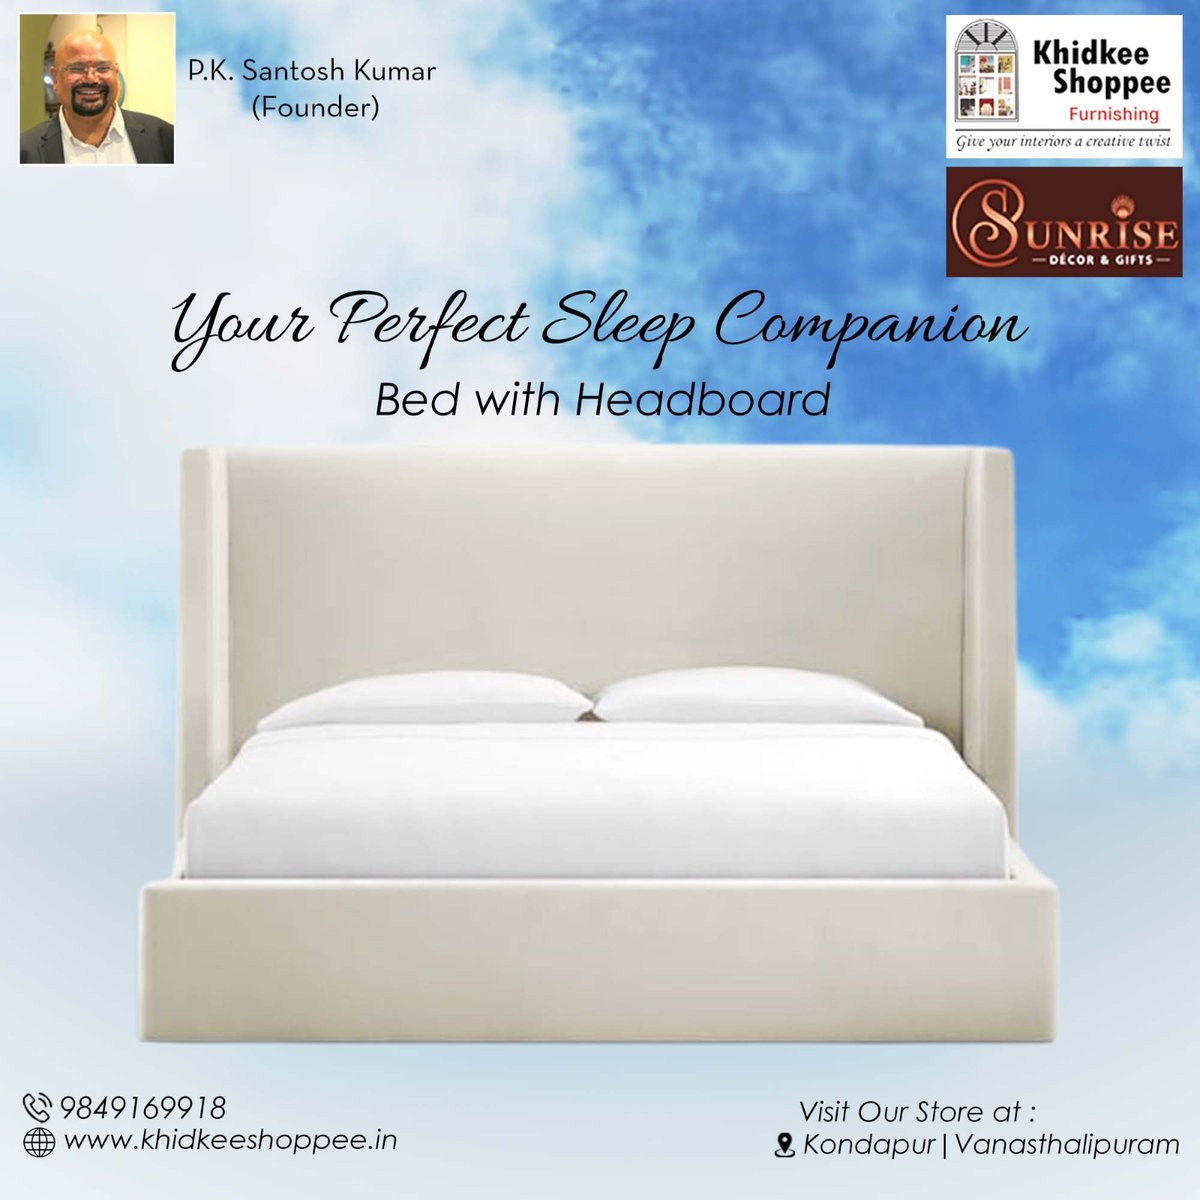 Discover Dream Beds at Khidkee Shoppee! Elevate your sleep game with comfort and style. Visit us now!
 
#KhidkeeShoppee #homedecor #homefurnishing #bedroomdecor #PamperYourself #bedroom #bedtime #bedifferent #bedroomgoals #bedsheets #bedroomstyle #SleepWell #kondapur #Hyderabad